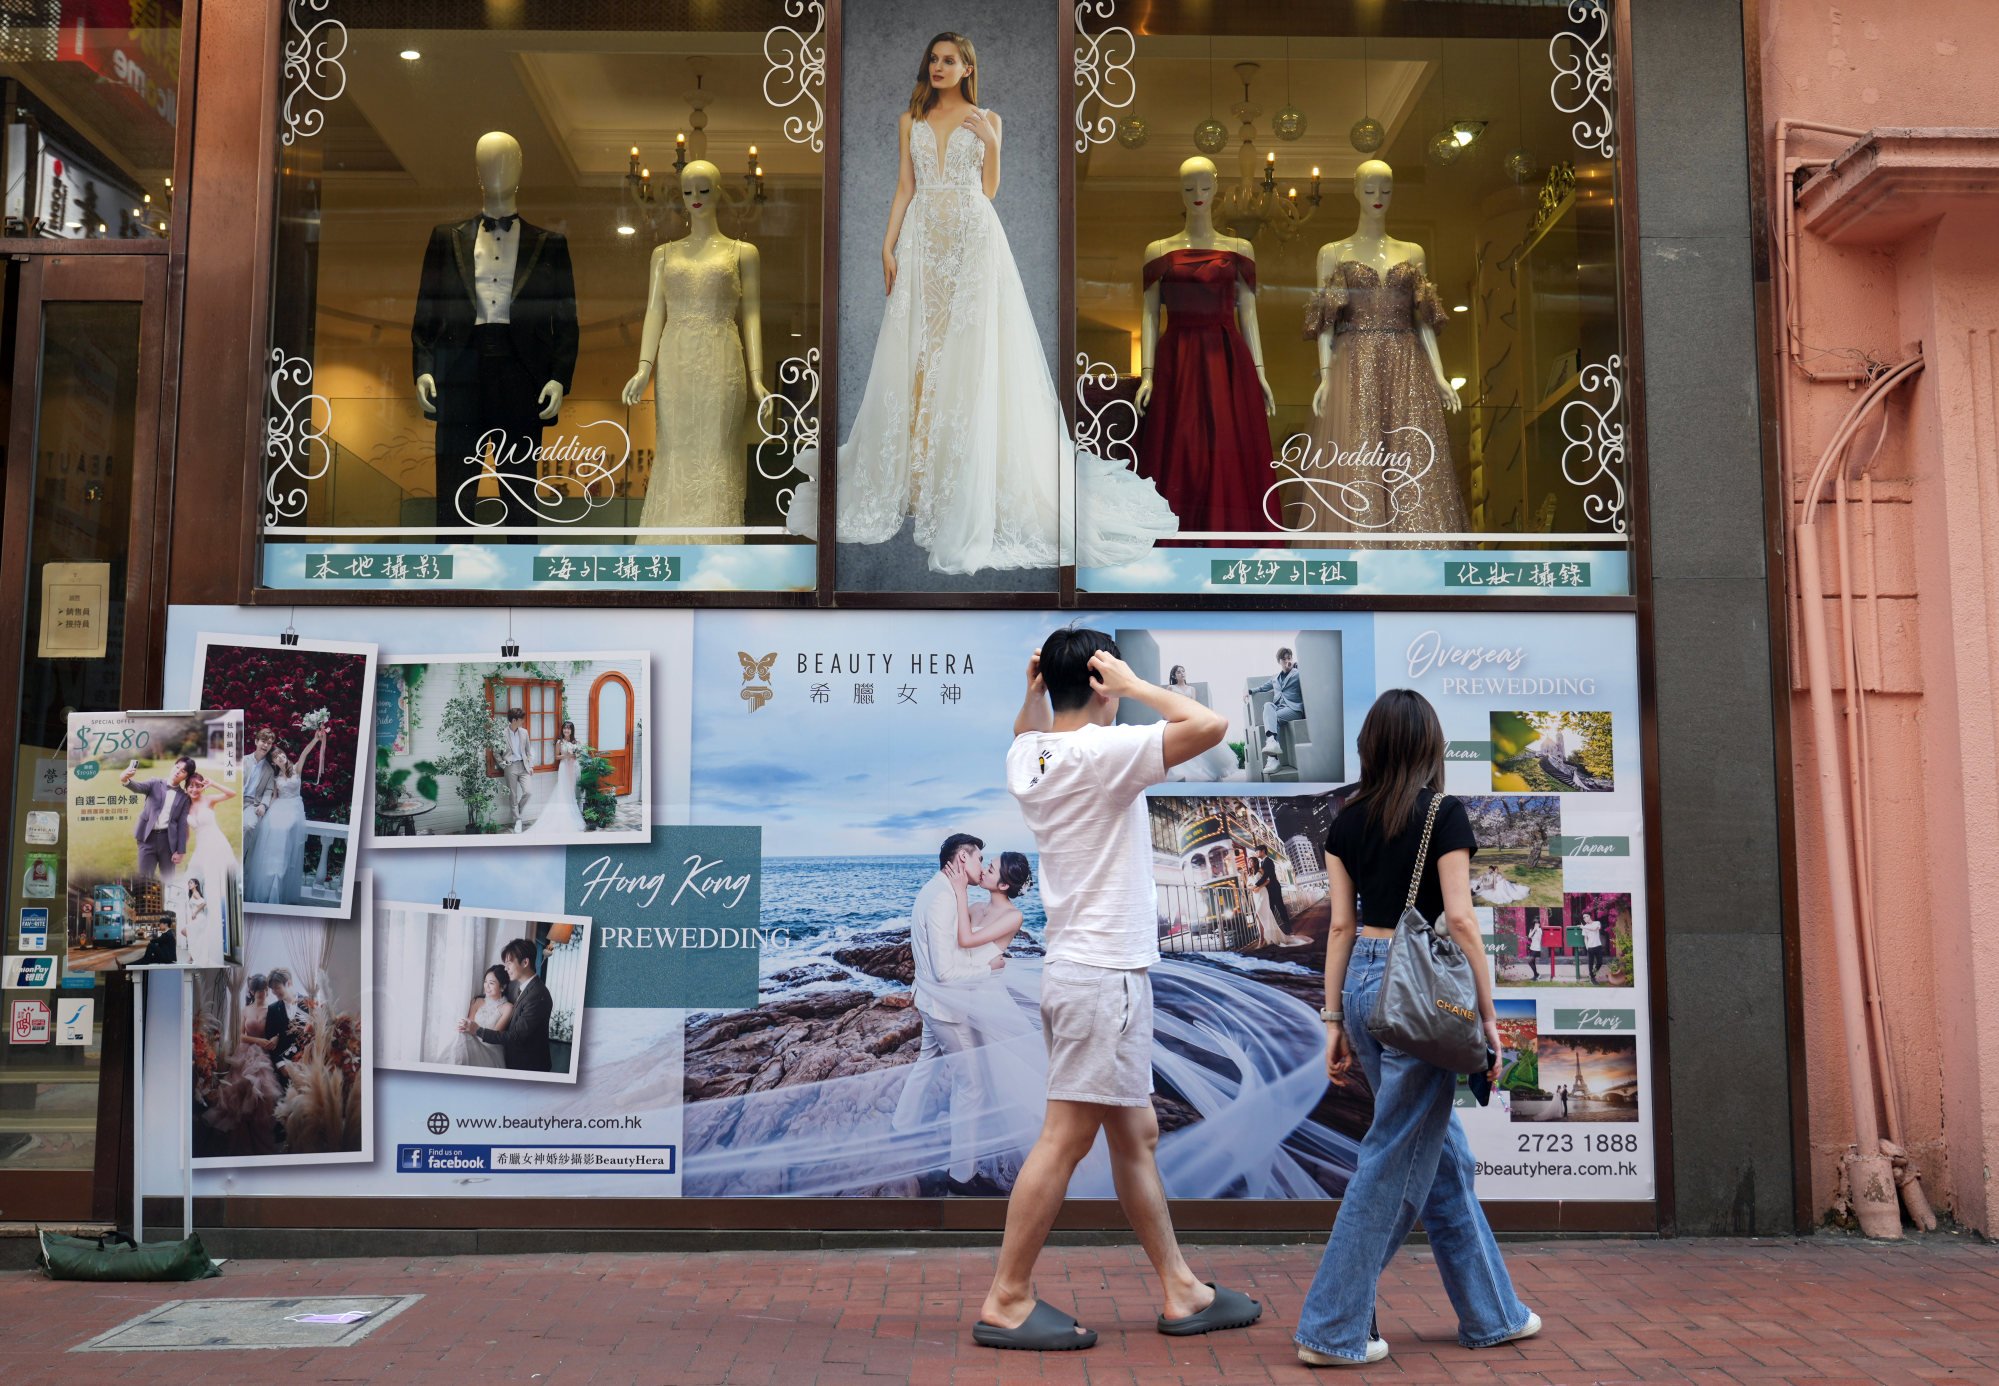 pricing on the cake: hong kong wedding expenses reach 5-year high, surpassing hk$400,000 for first time since 2019